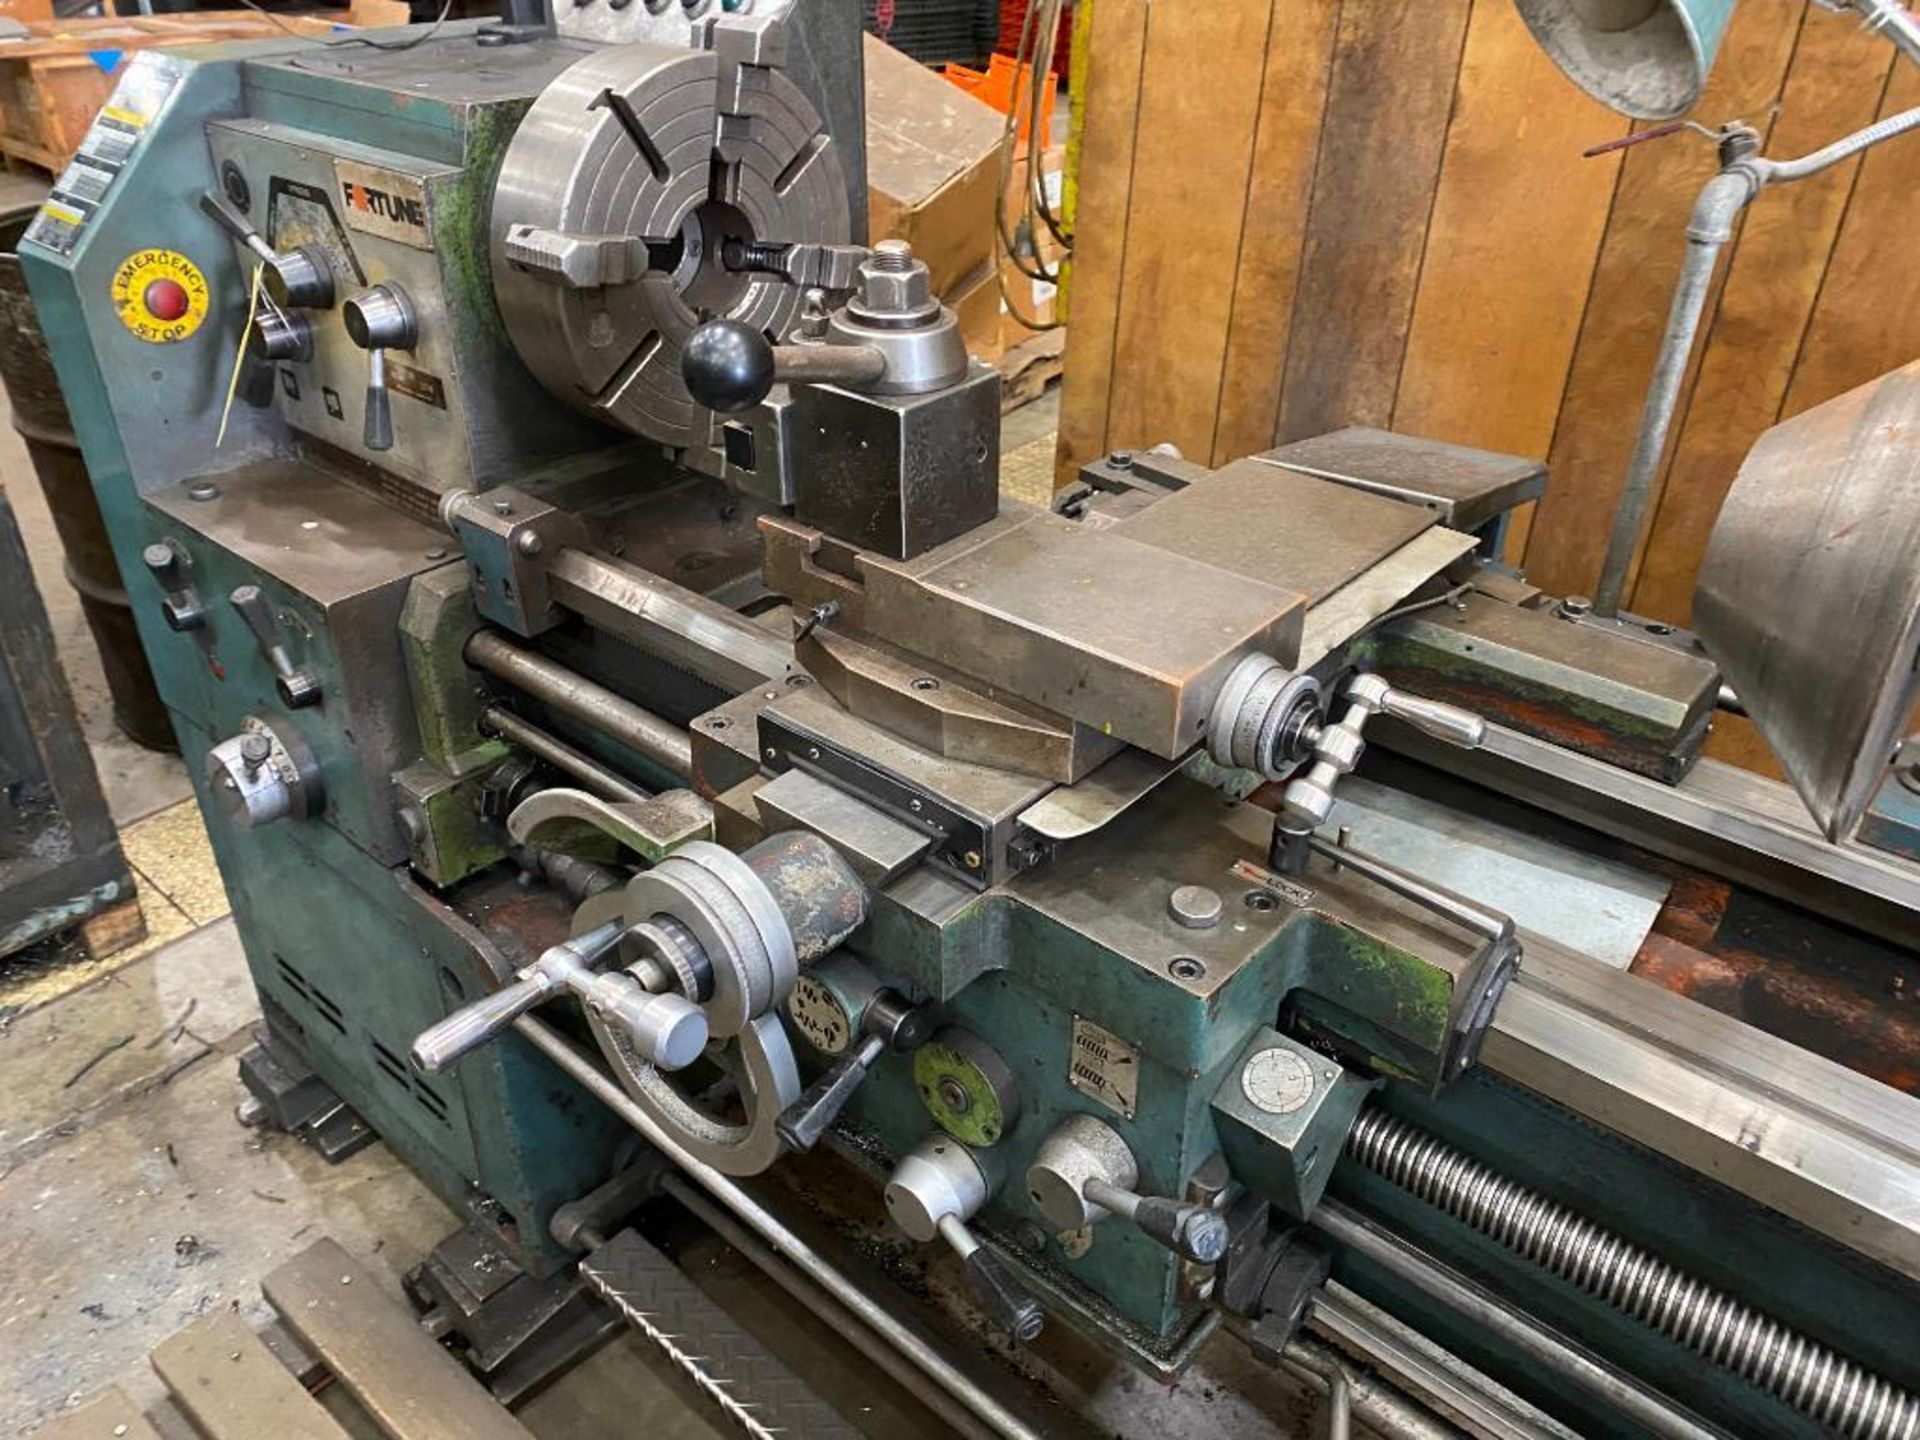 Fortune 20100 Lathe w/ Newall Readout, 118" x 14" Bed, 12" 4-Jaw Chuck, Carriage, Tool-Post, Tailsto - Image 3 of 10